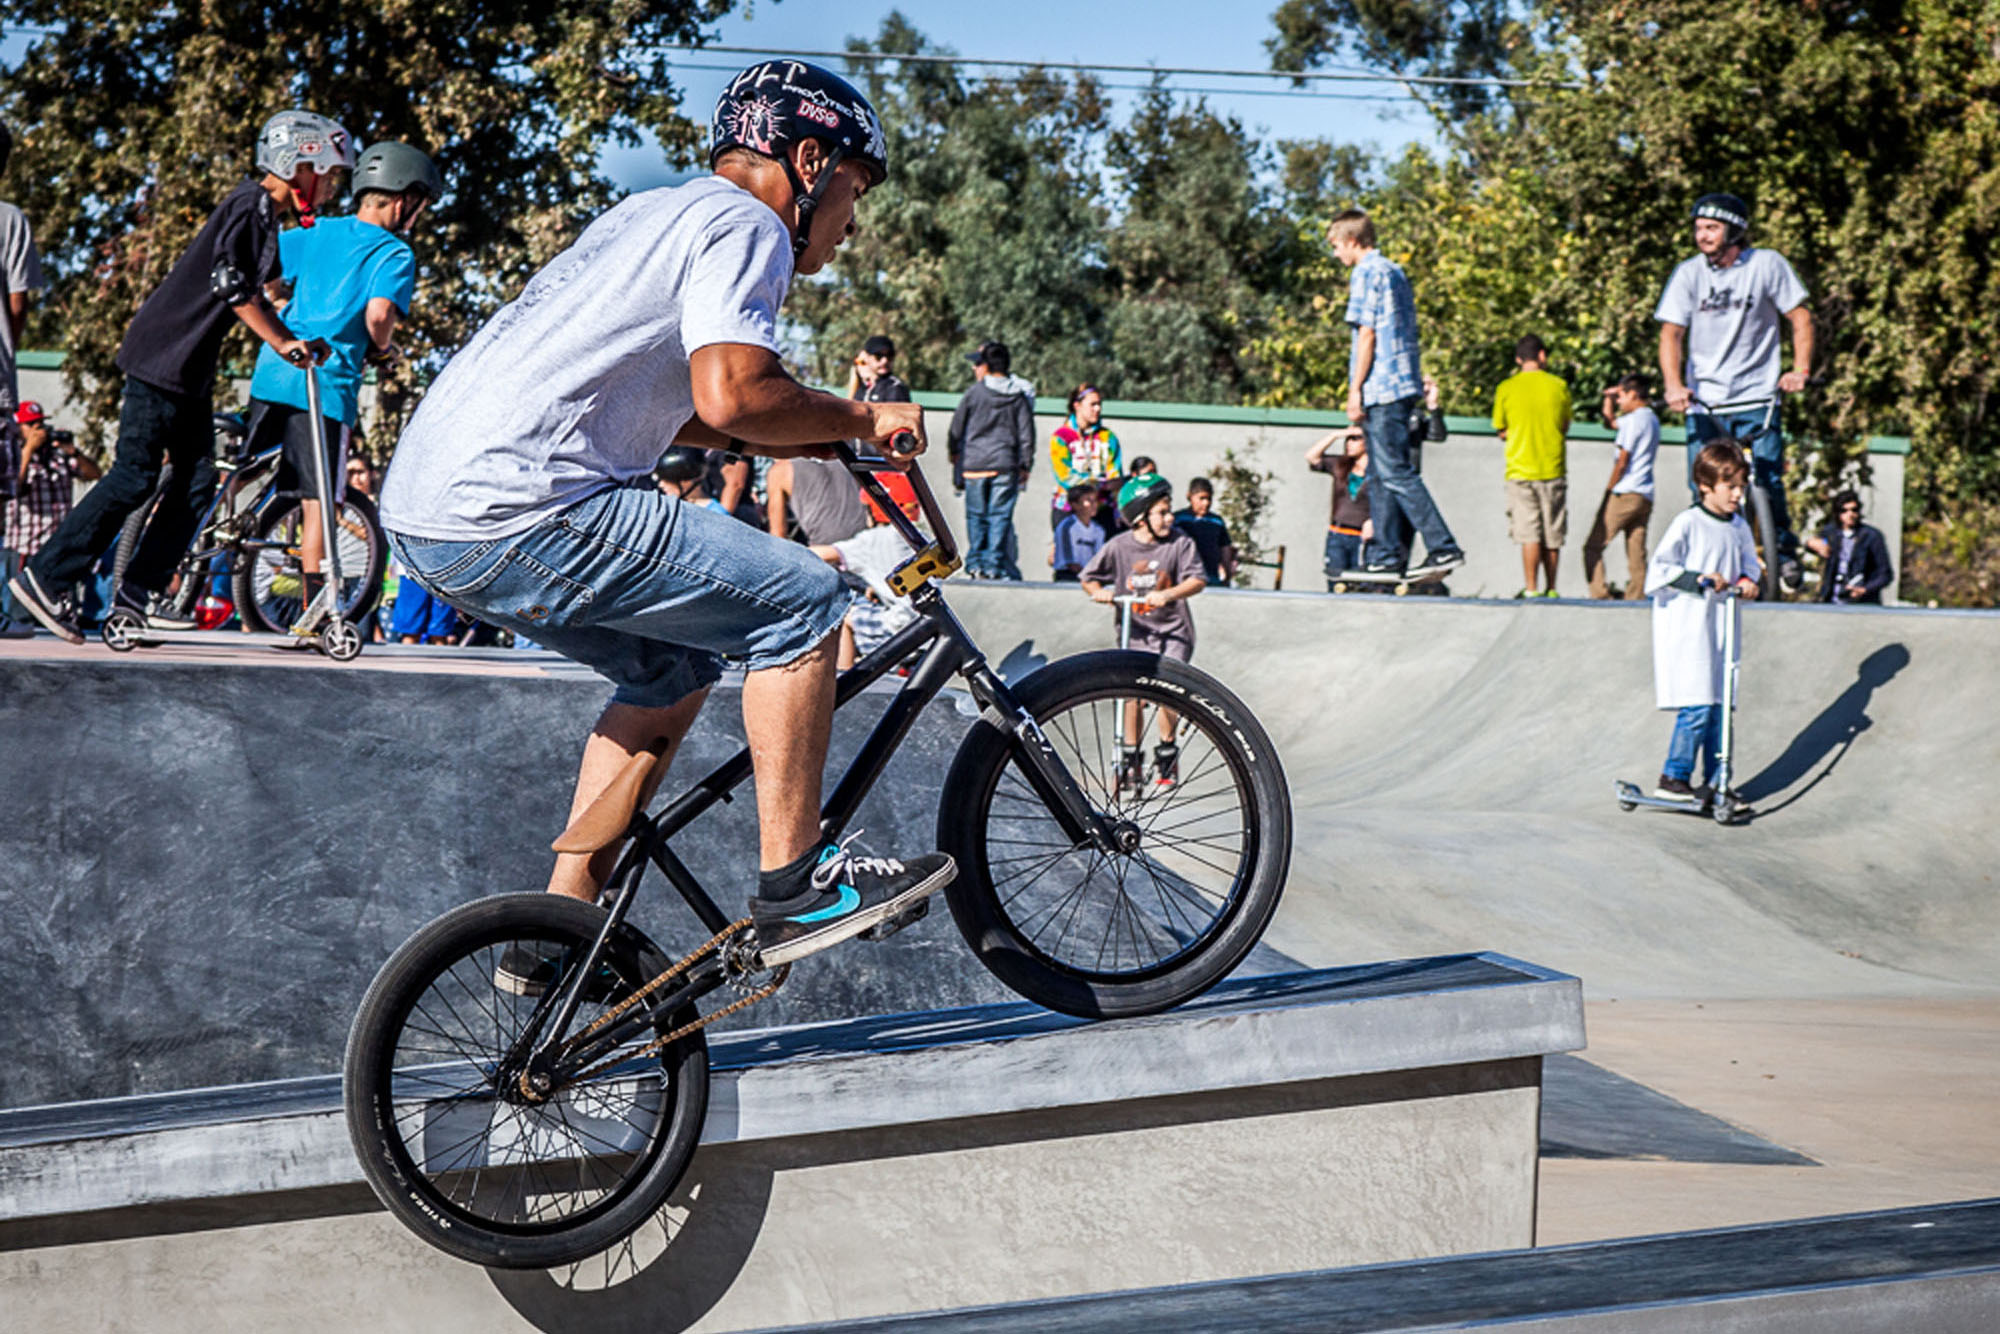 A man rides his BMX bike in a skatepark with people on scooters, bikes, and skateboards behind him